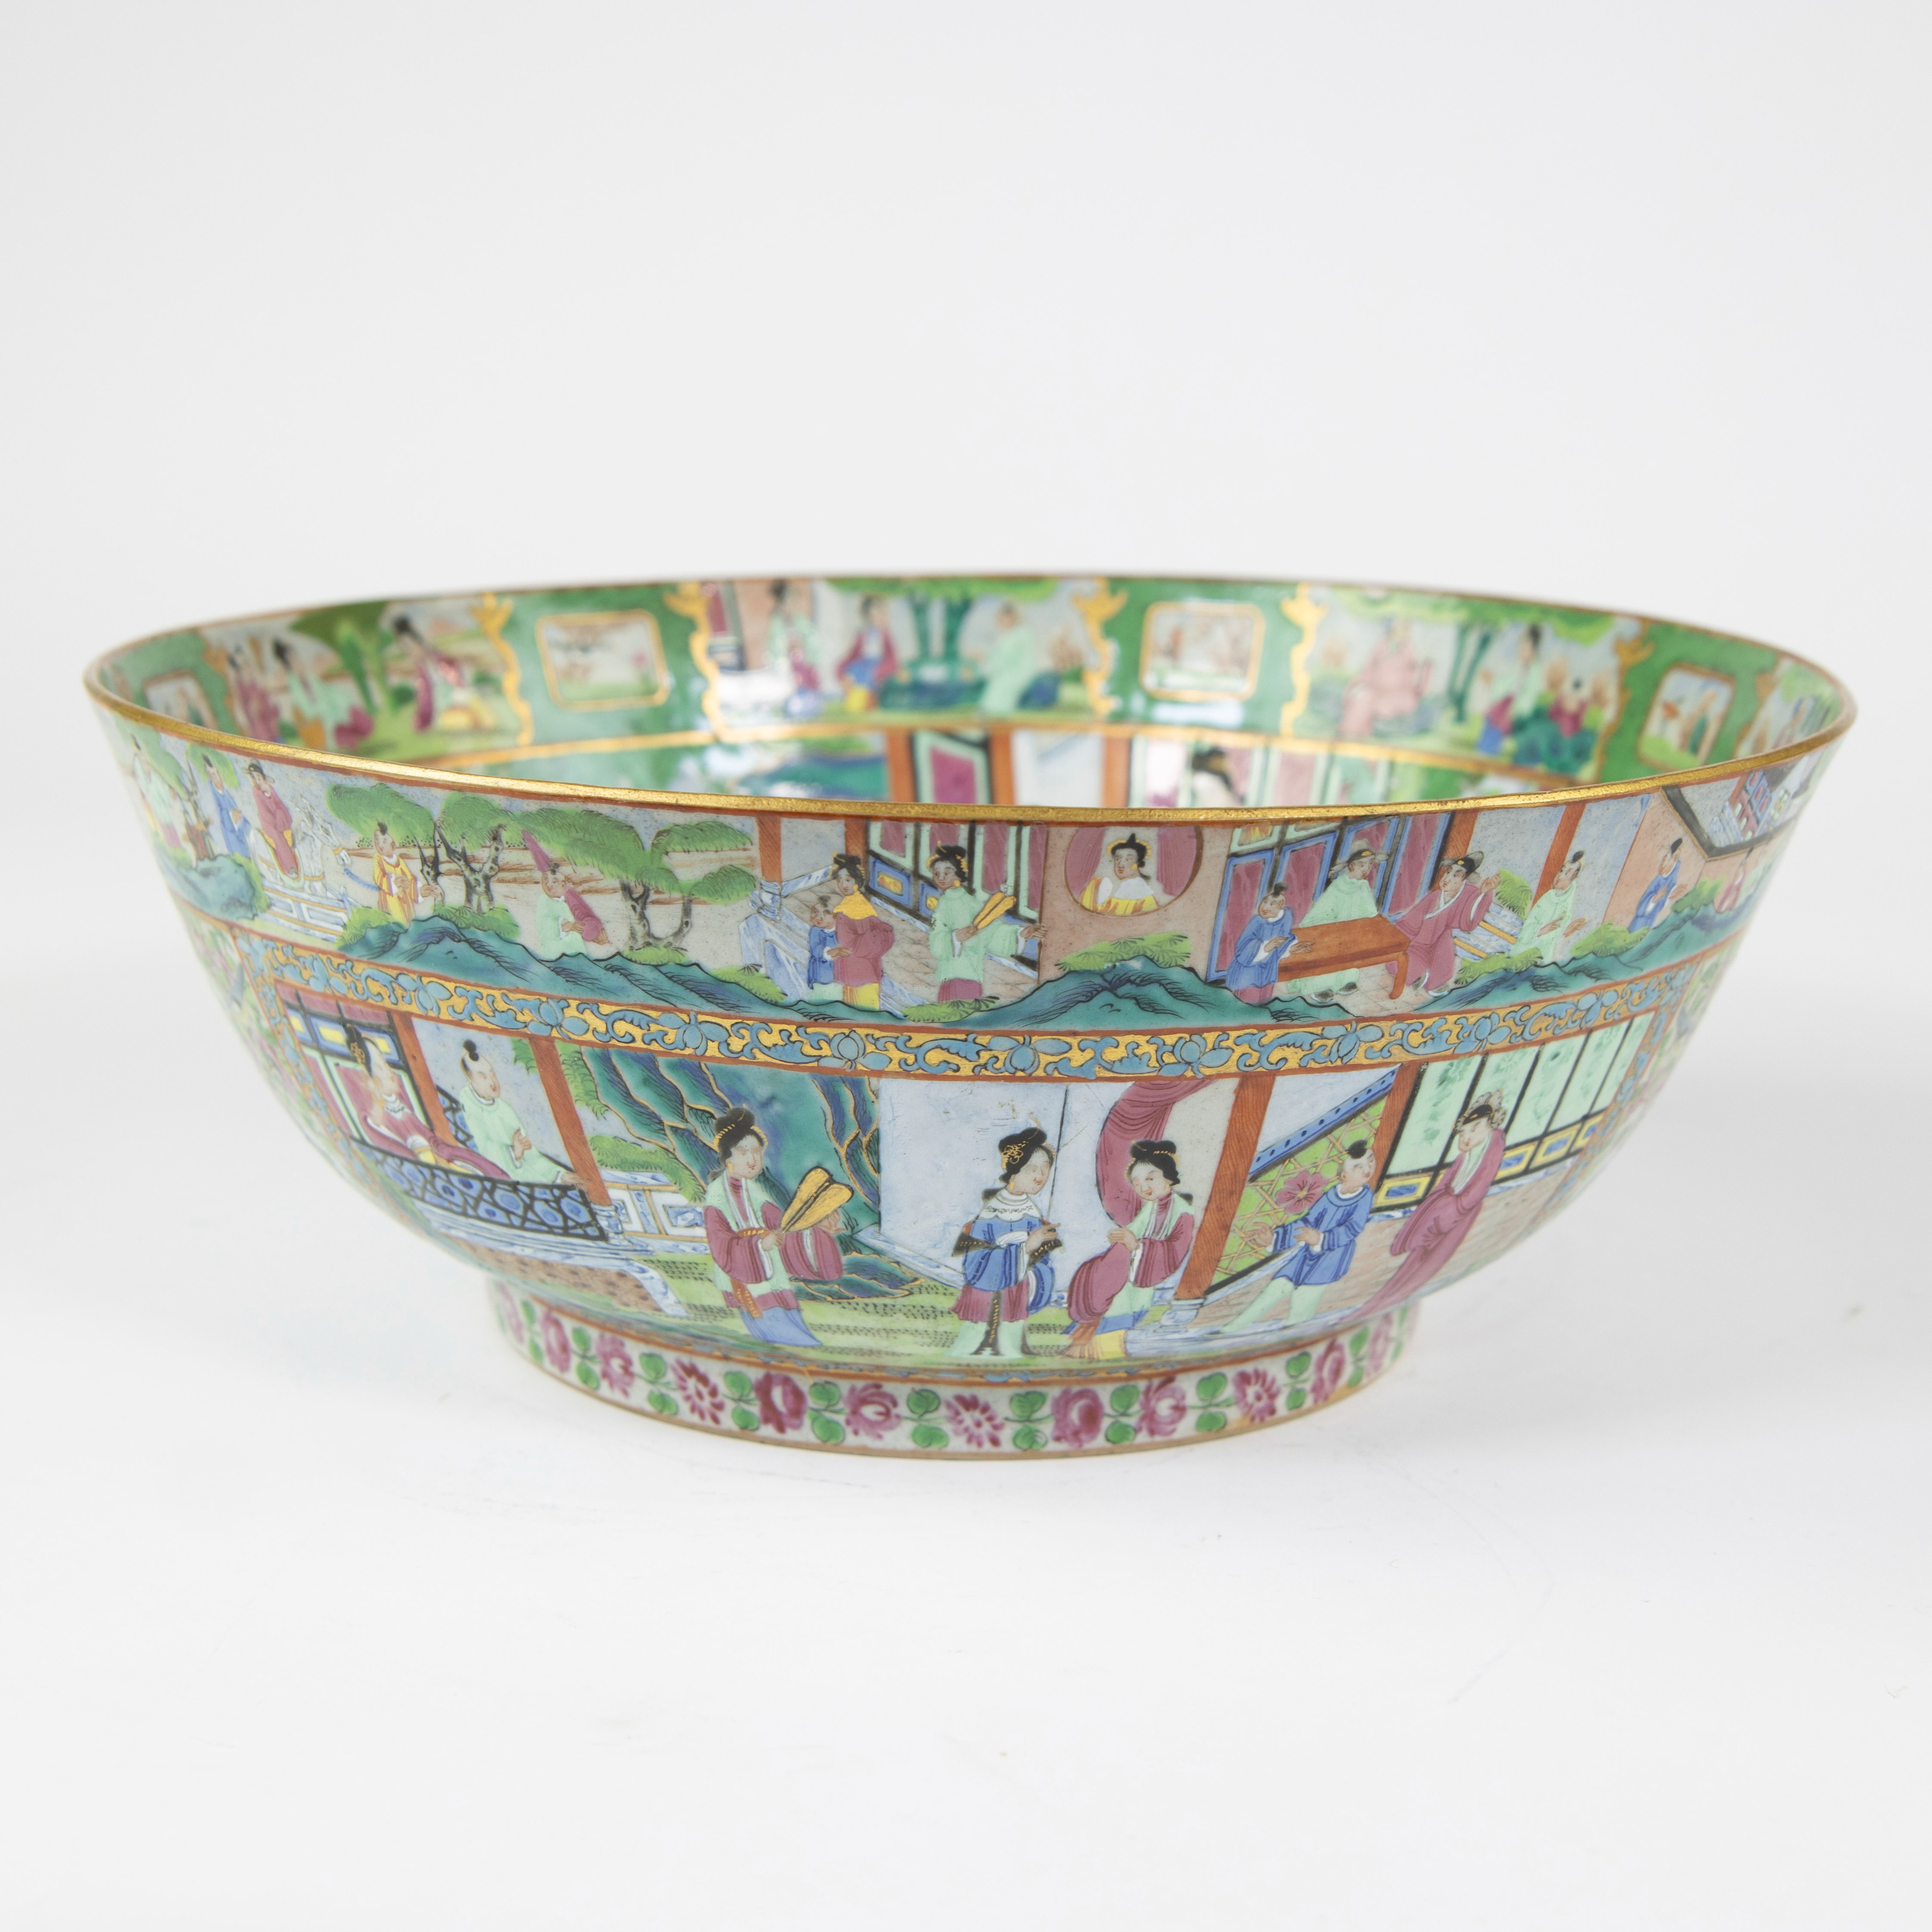 Large Chinese procelain famille rose bowl of exceptional quality, finely painted with scenes of educ